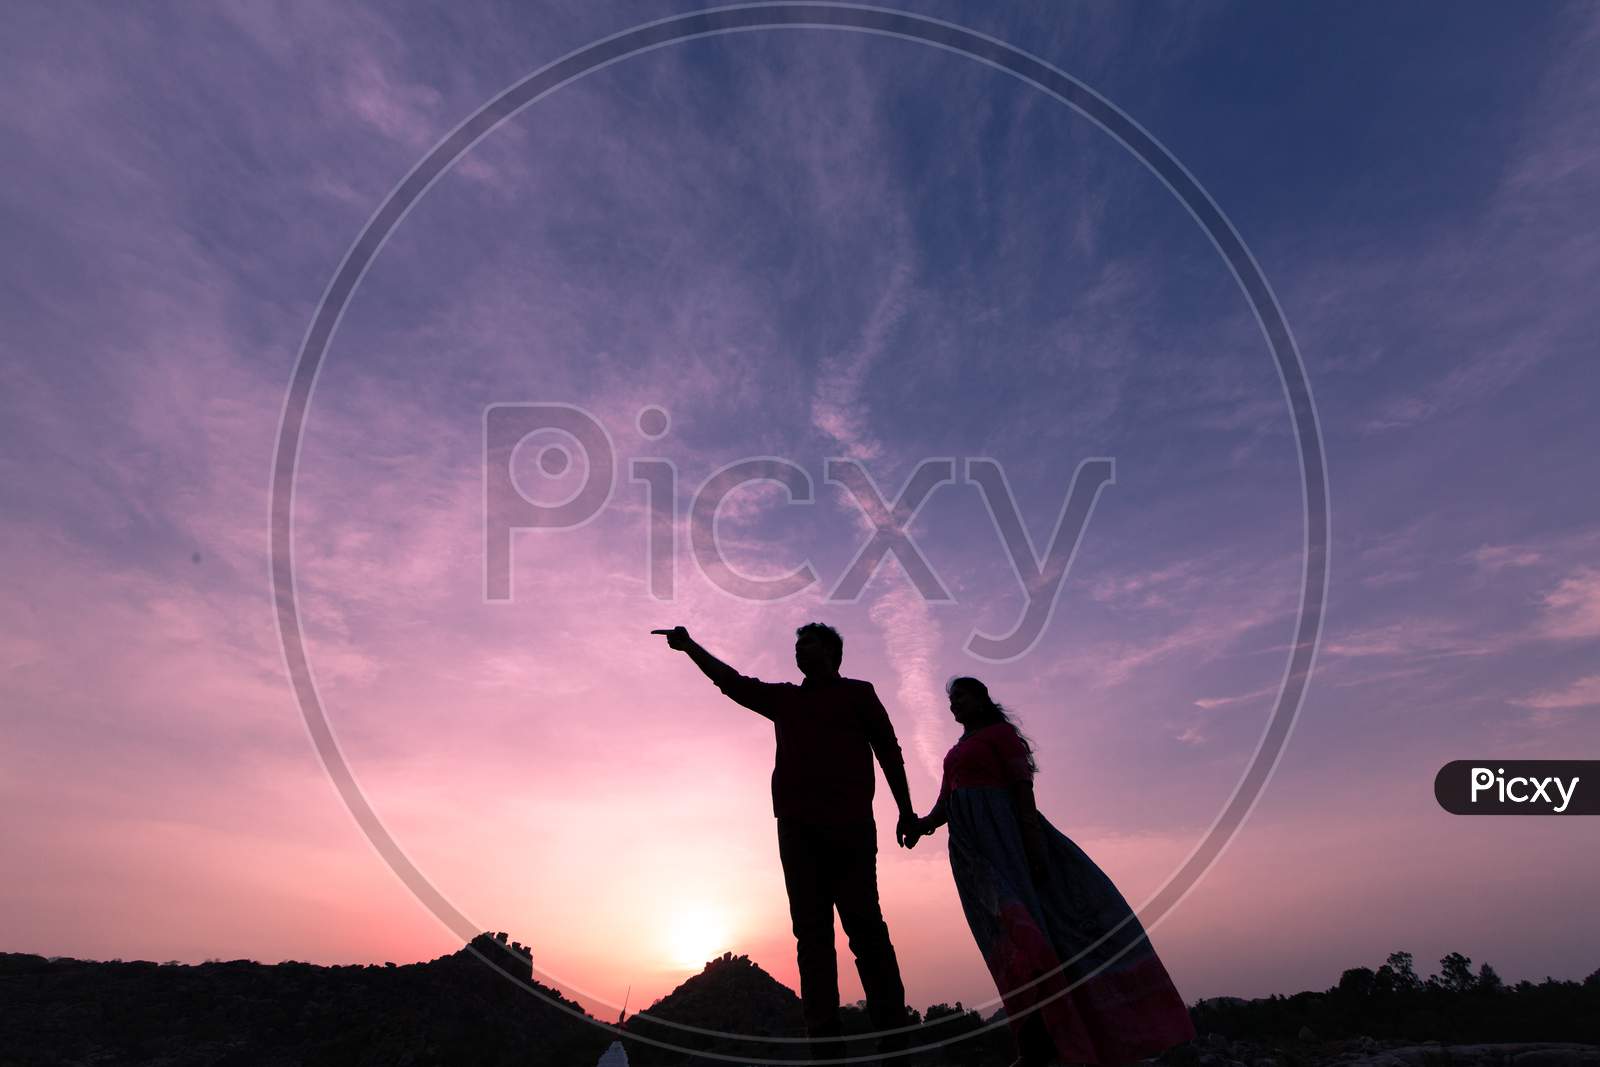 Silhouette of Indian newly married couple during a sunset